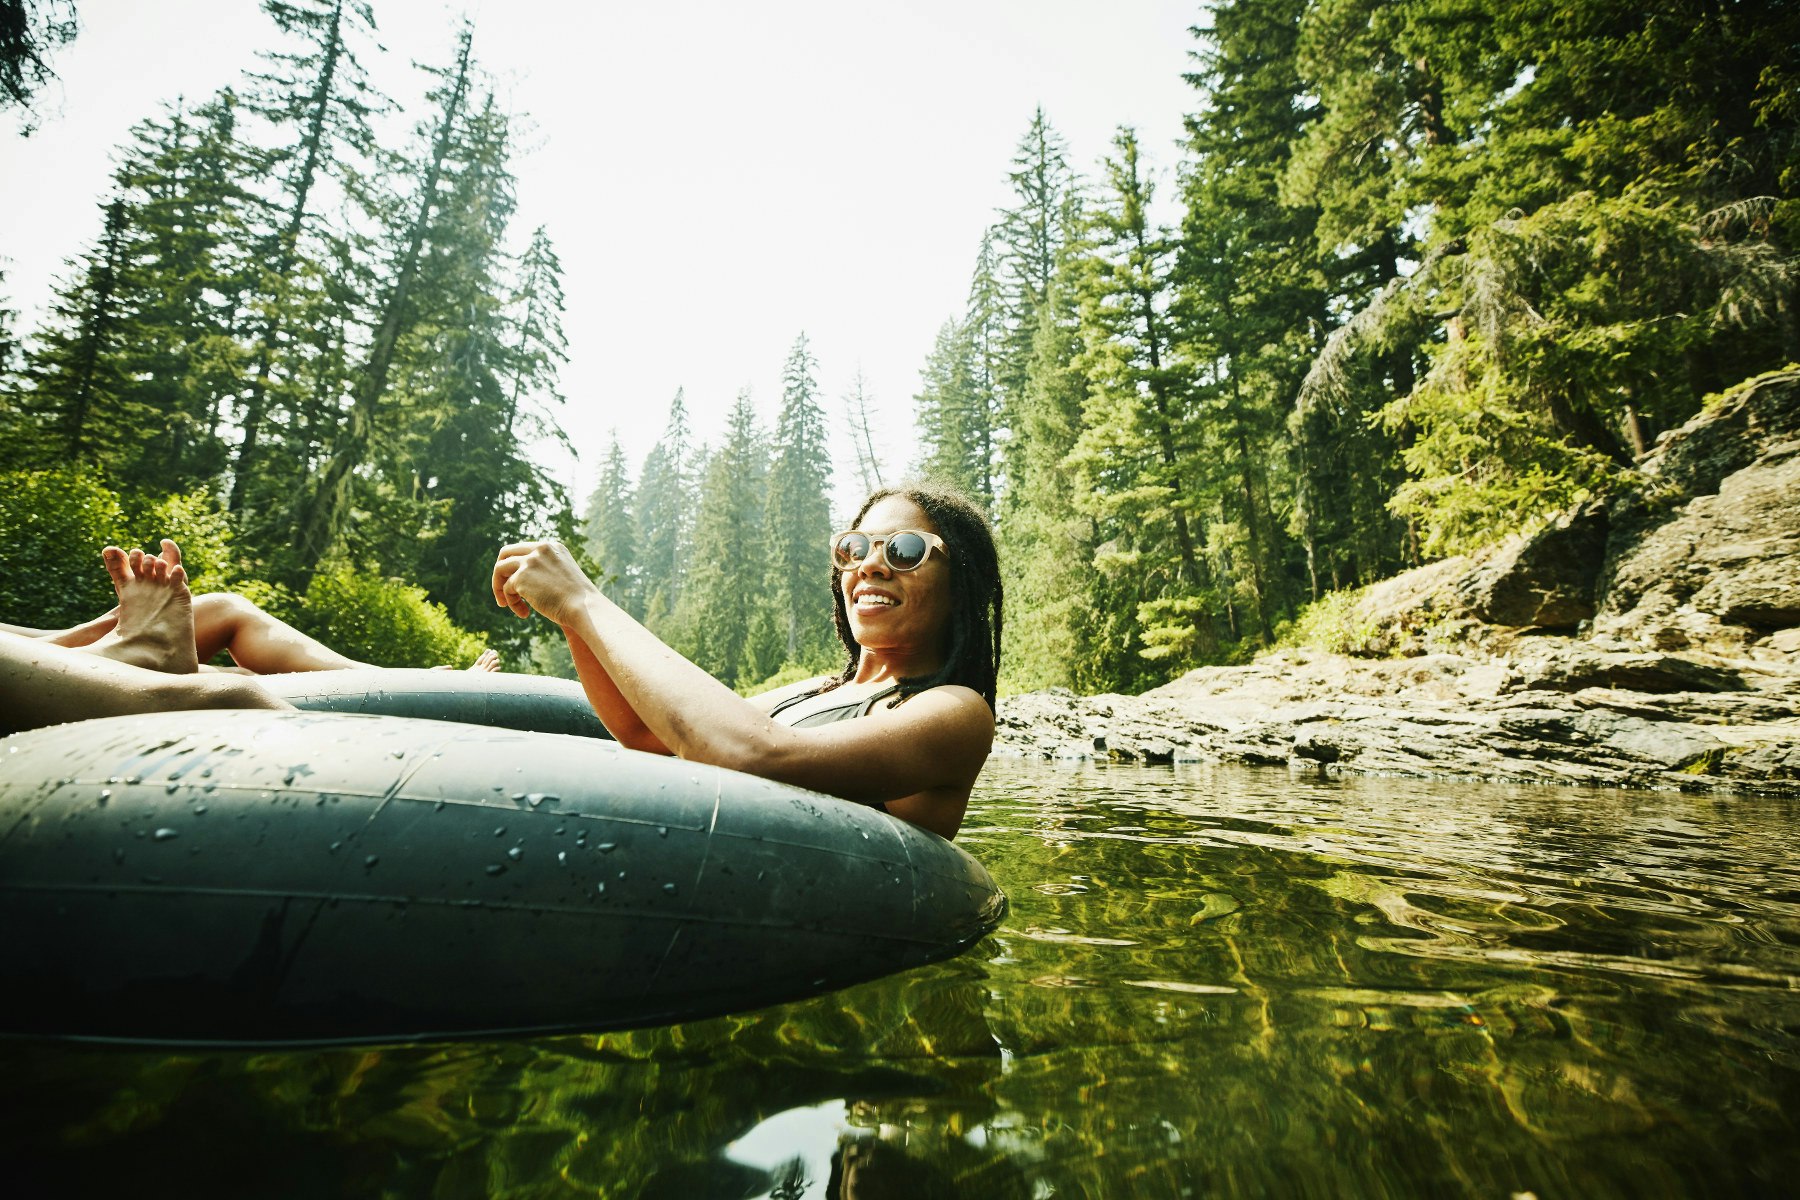 A smiling woman with sunglasses floating down a river on an inner tube on a sunny day.